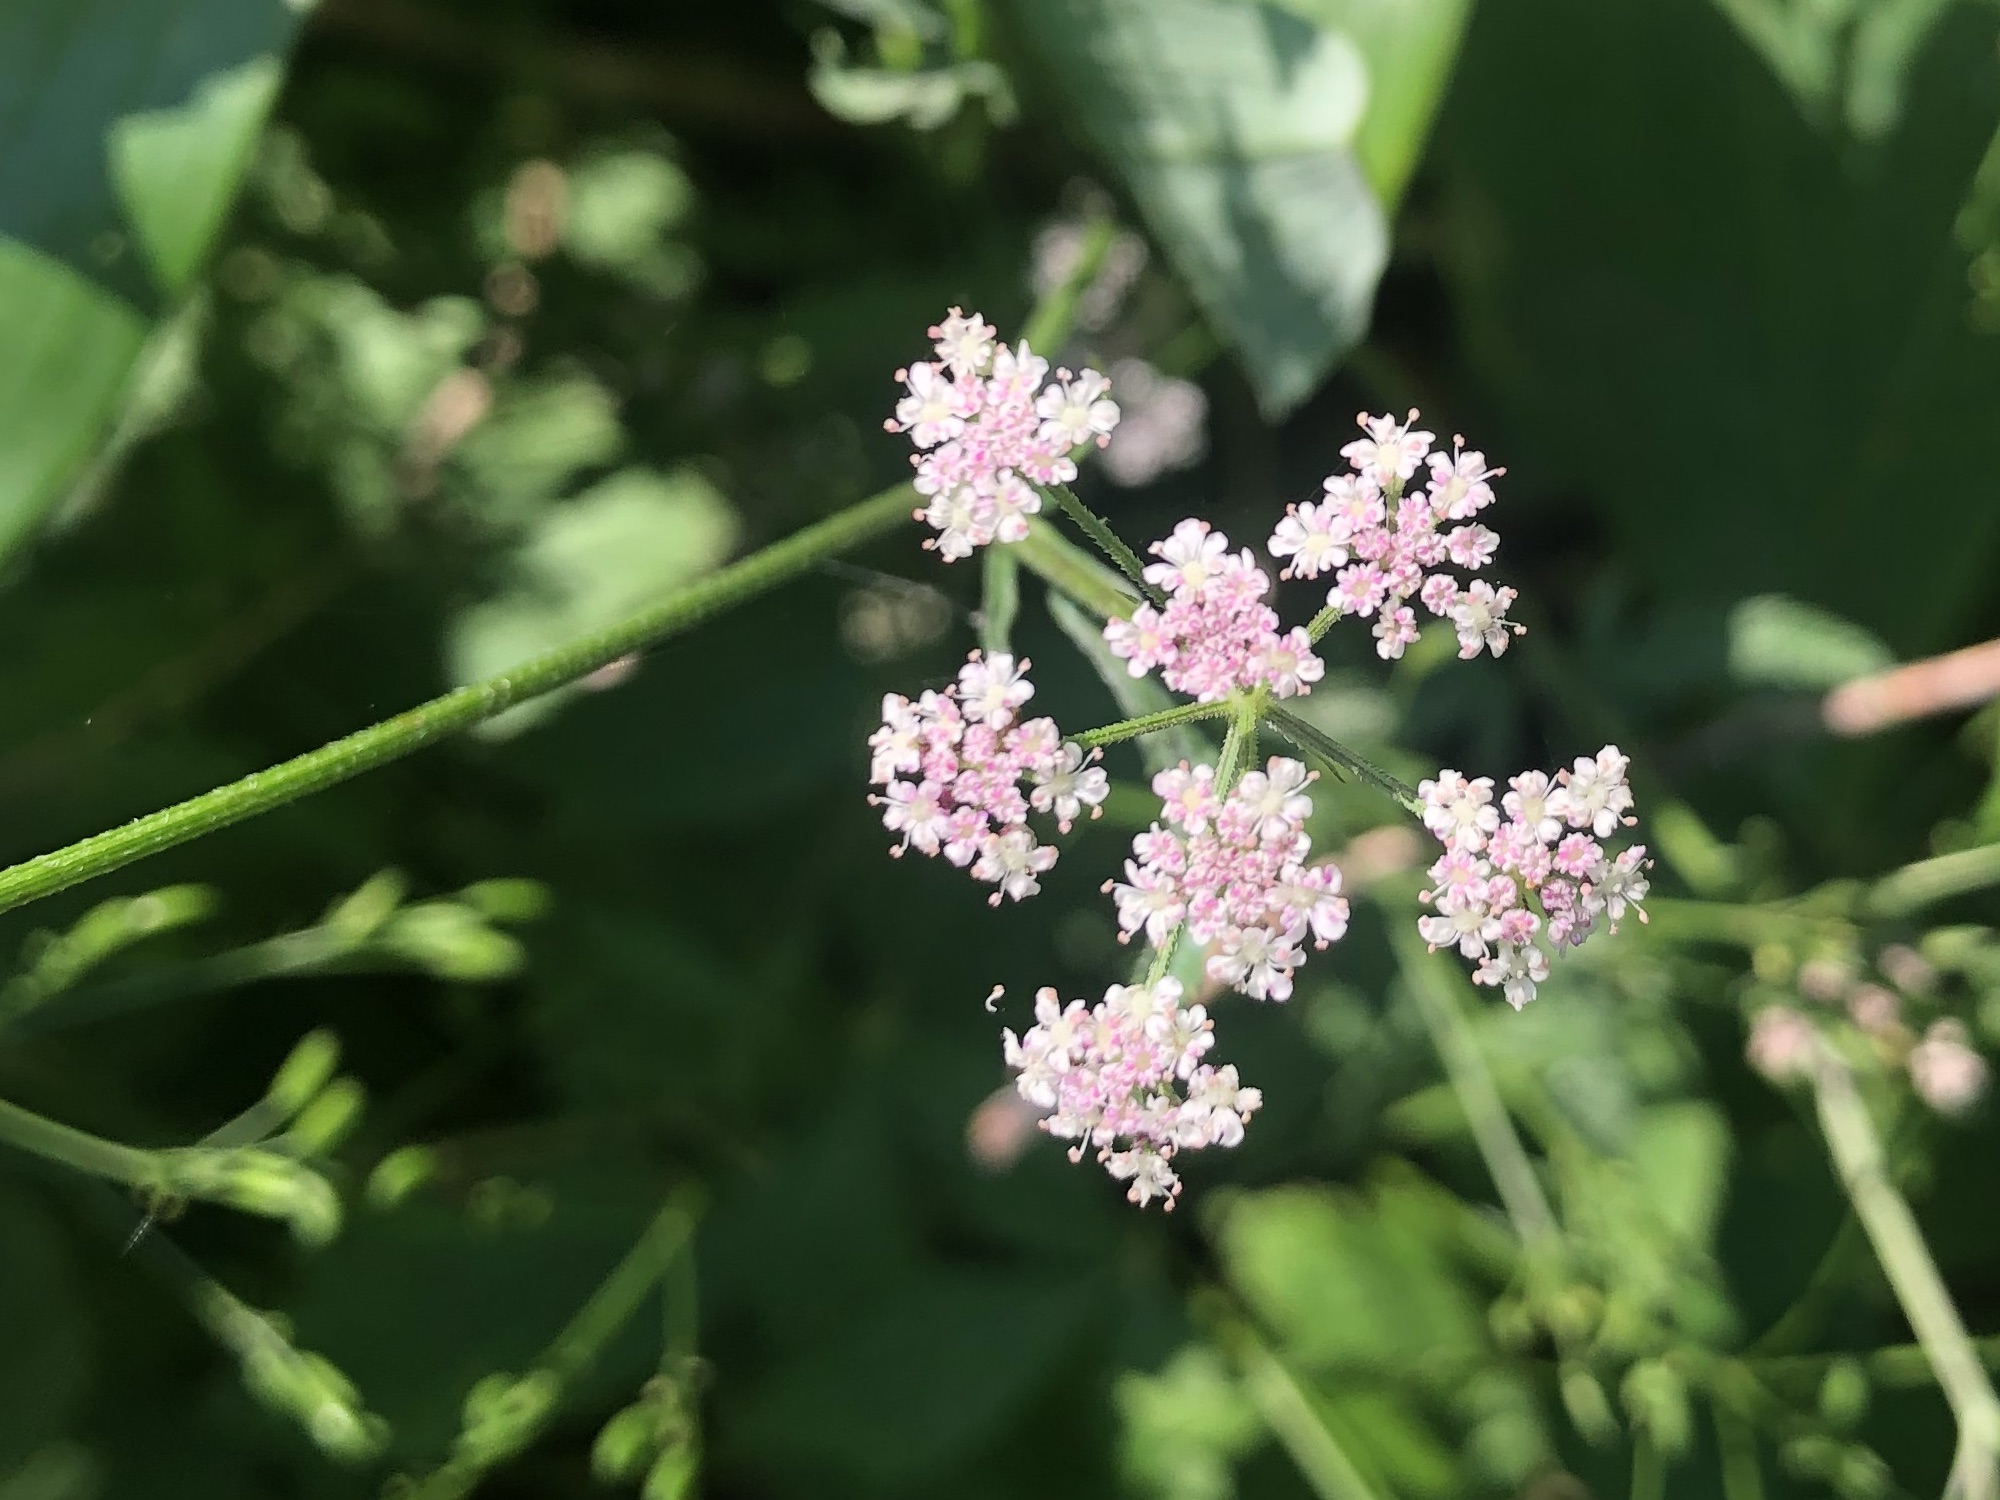 Hedge Parsley in Madison, Wisconsin on July 19, 2022